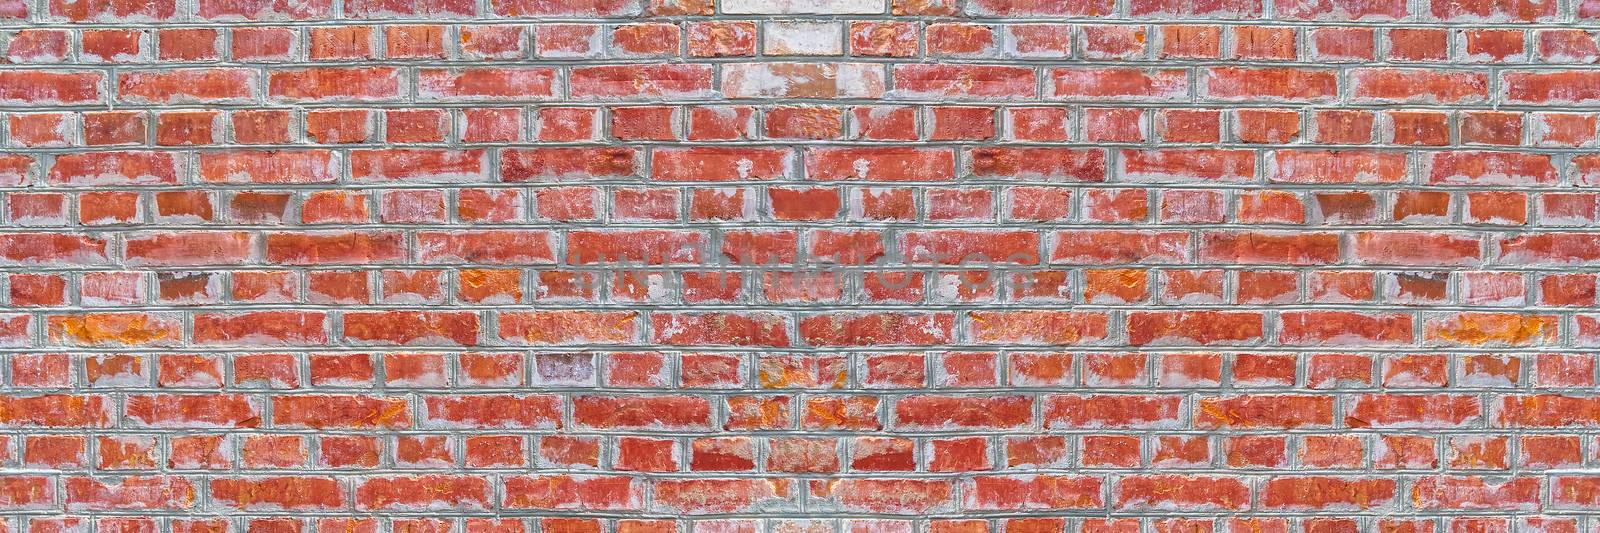 Panoramic rugged old red brown bricks wall texture. vintage retro industrial banner background